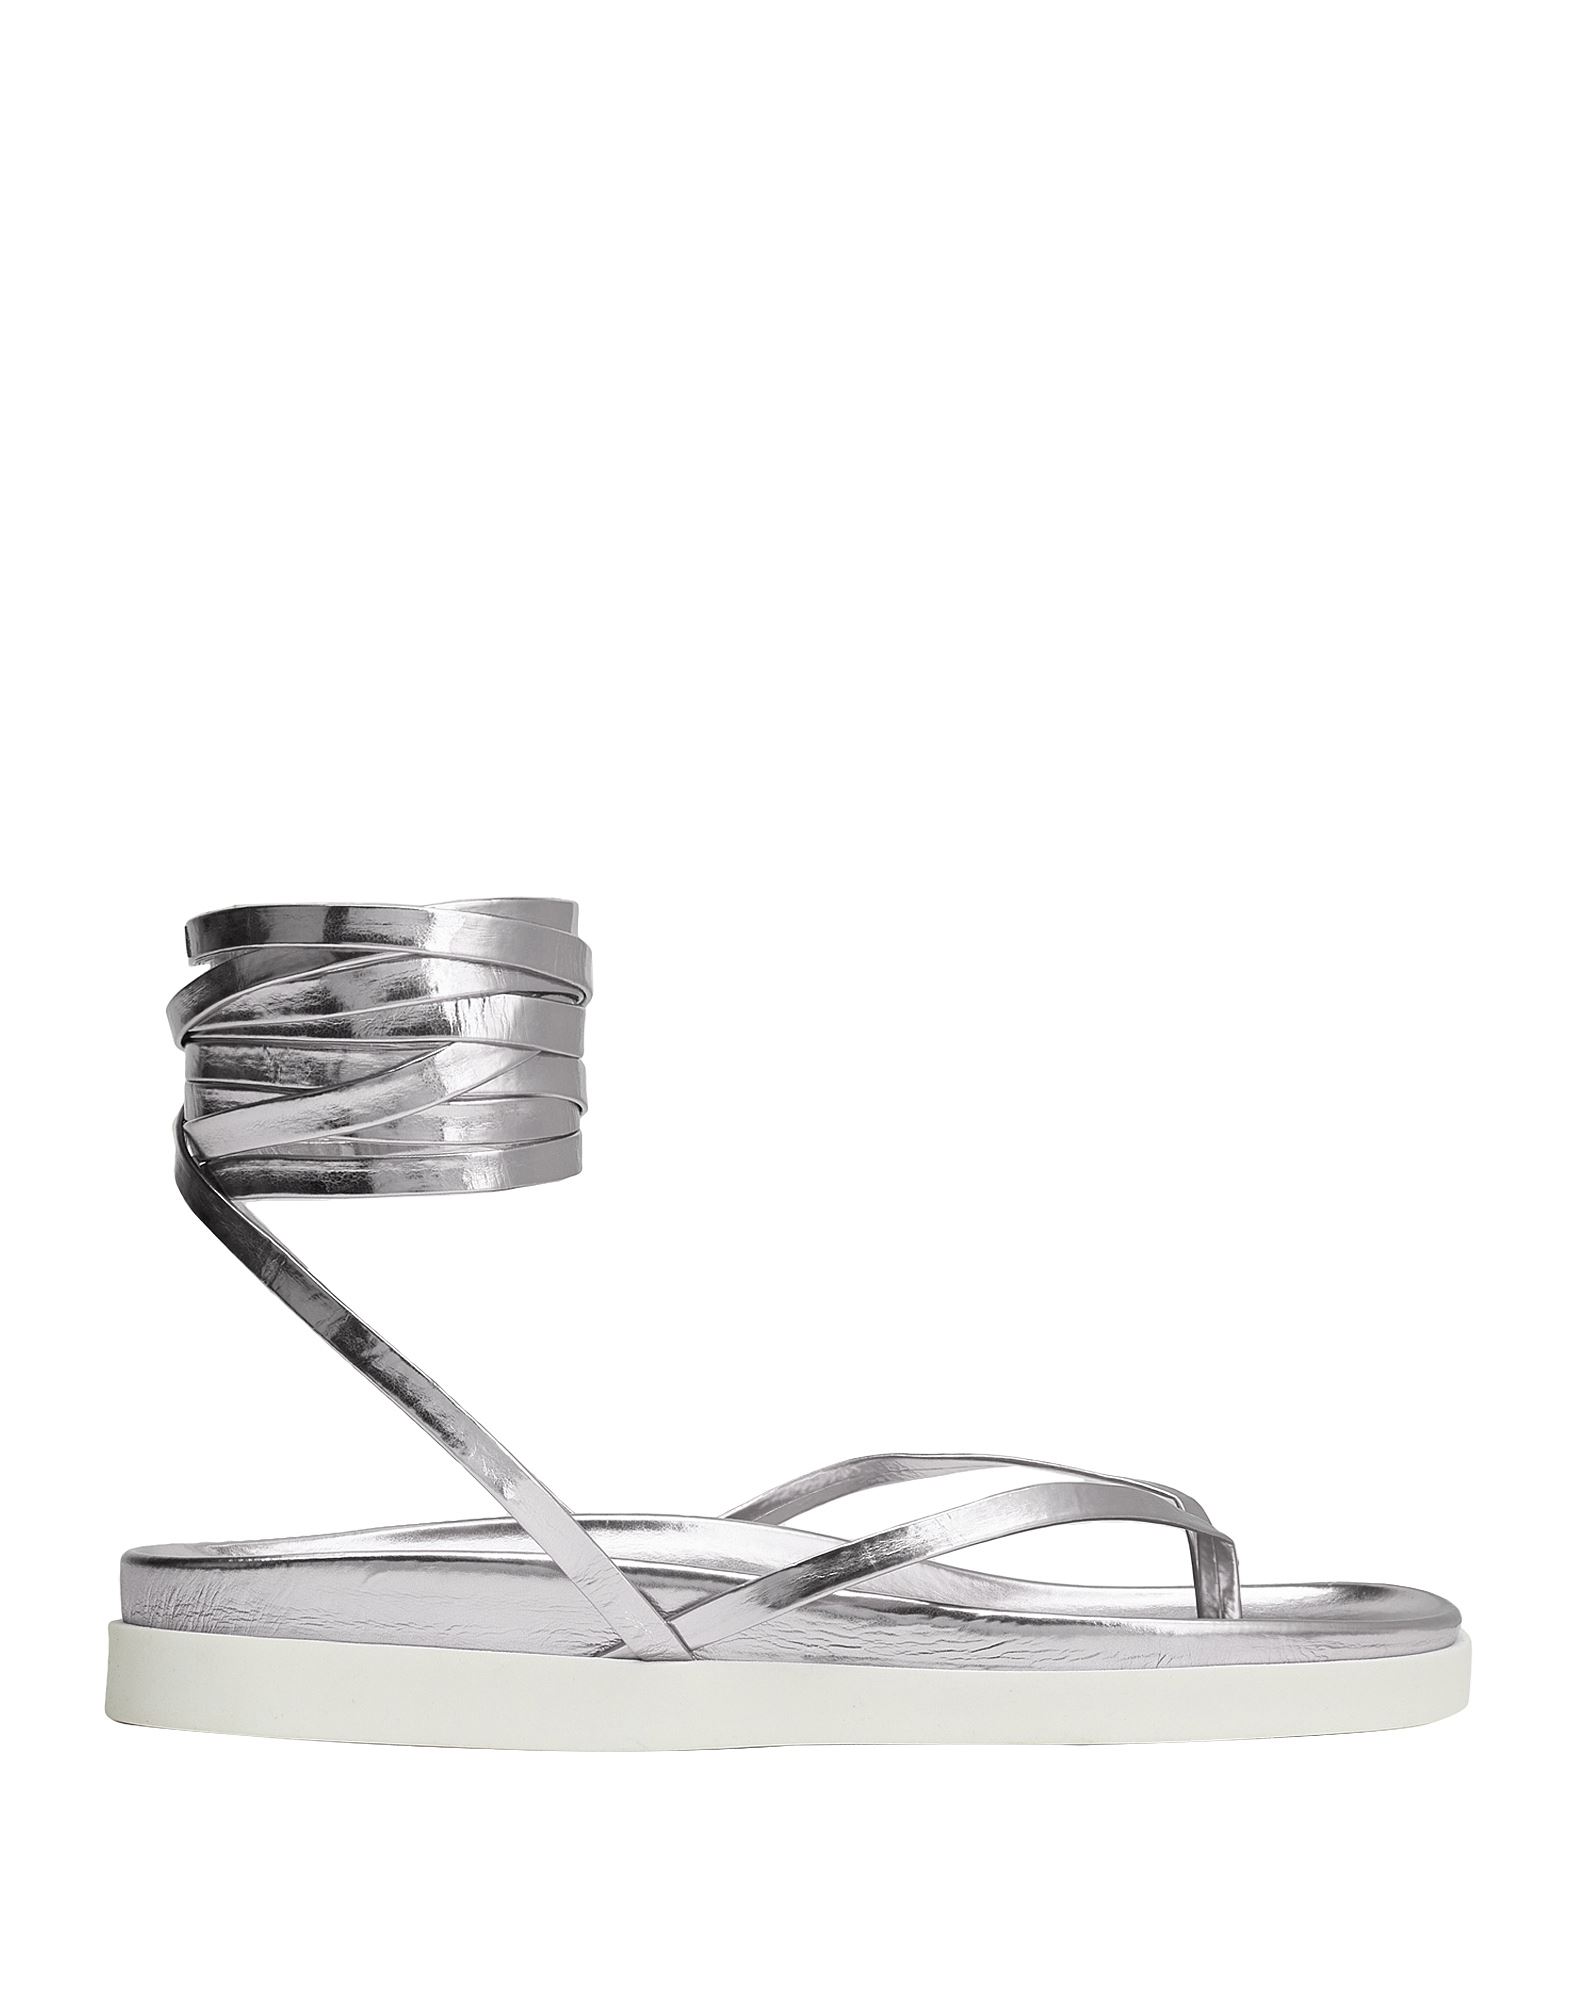 8 By Yoox Toe Strap Sandals In Silver